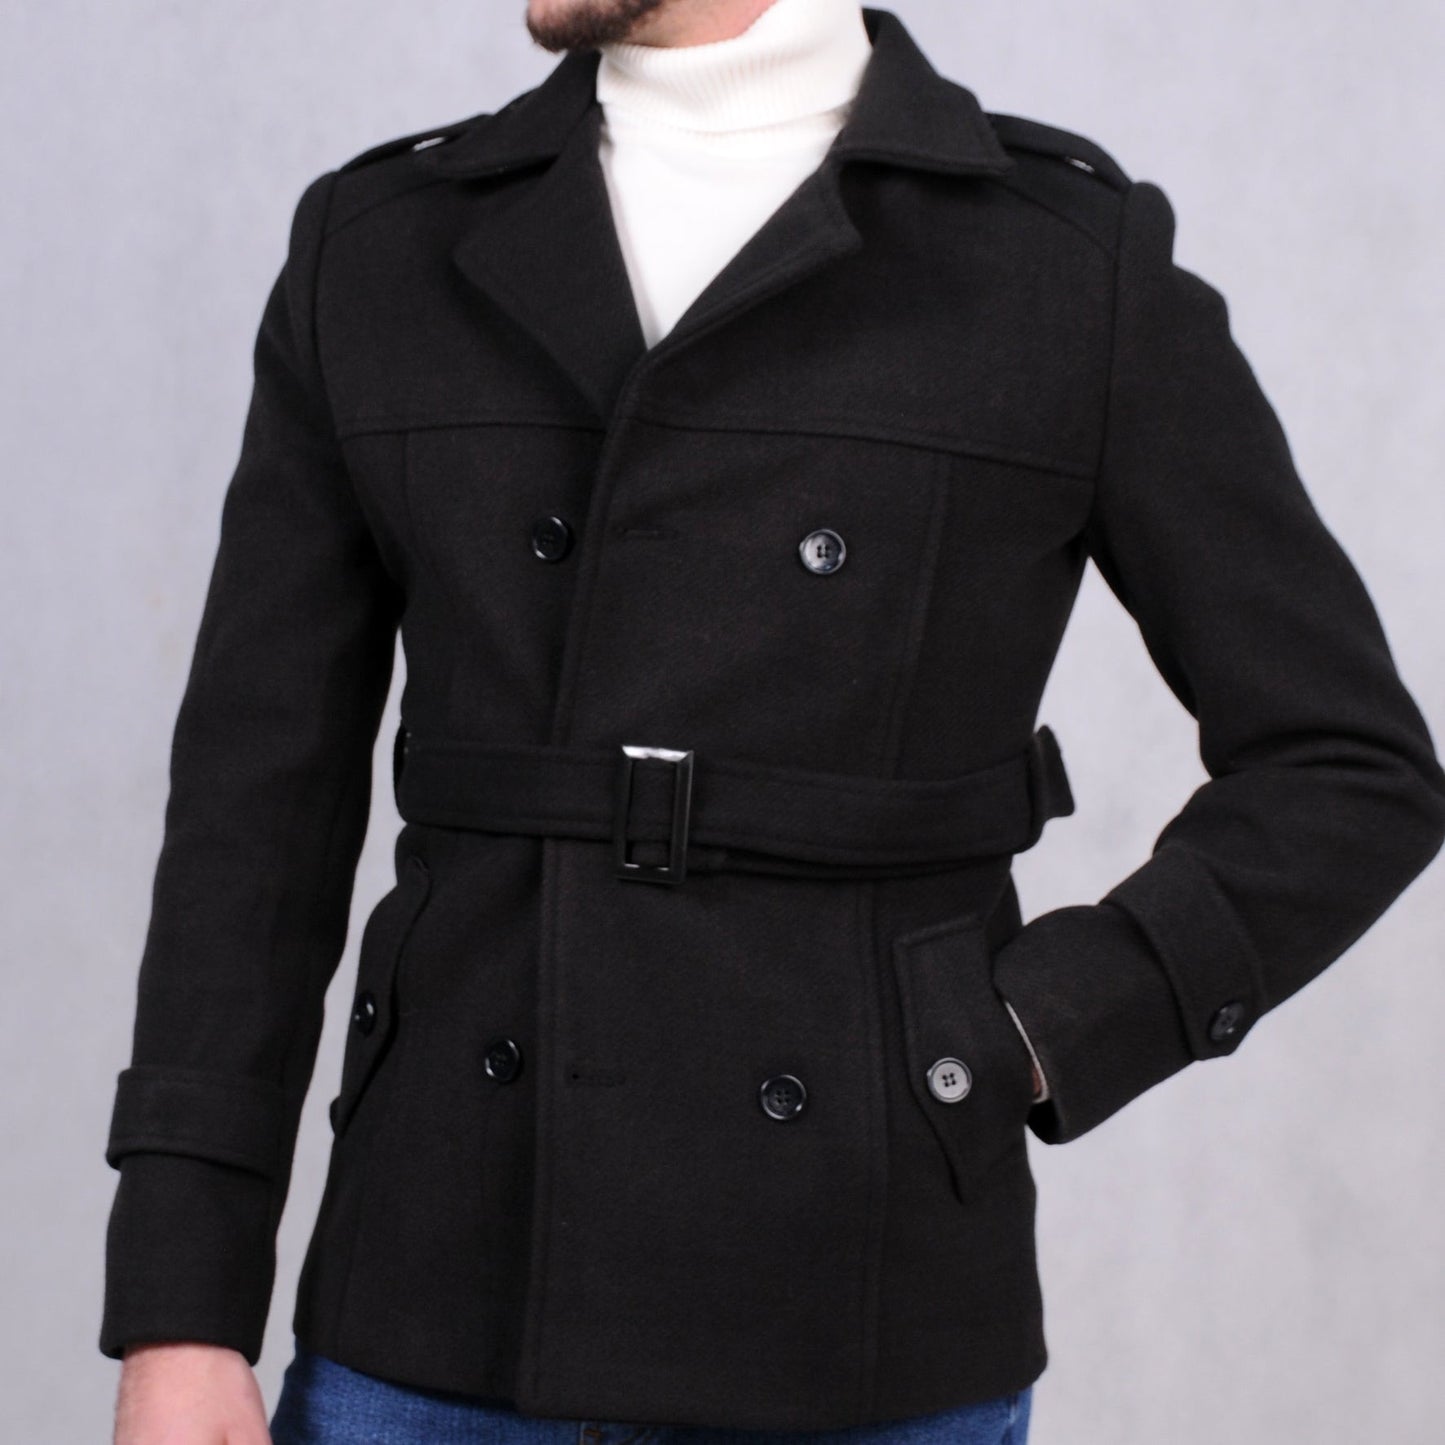 SALE! 2H Black Coat Double-Breasted Jacket